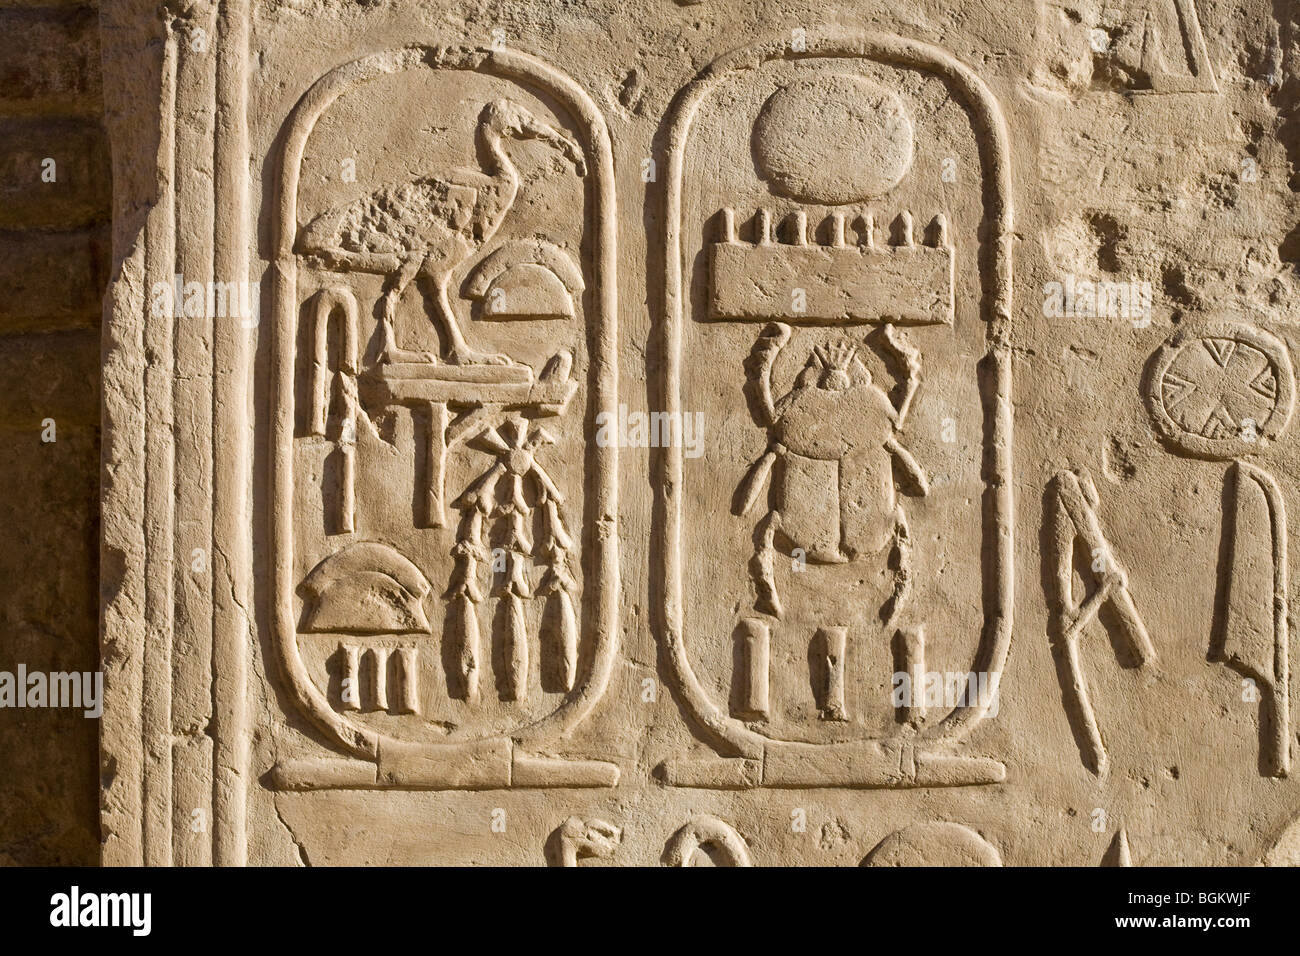 The cartouche of Thuthmoses IV inscribed on wall at Luxor Temple, Egypt Stock Photo